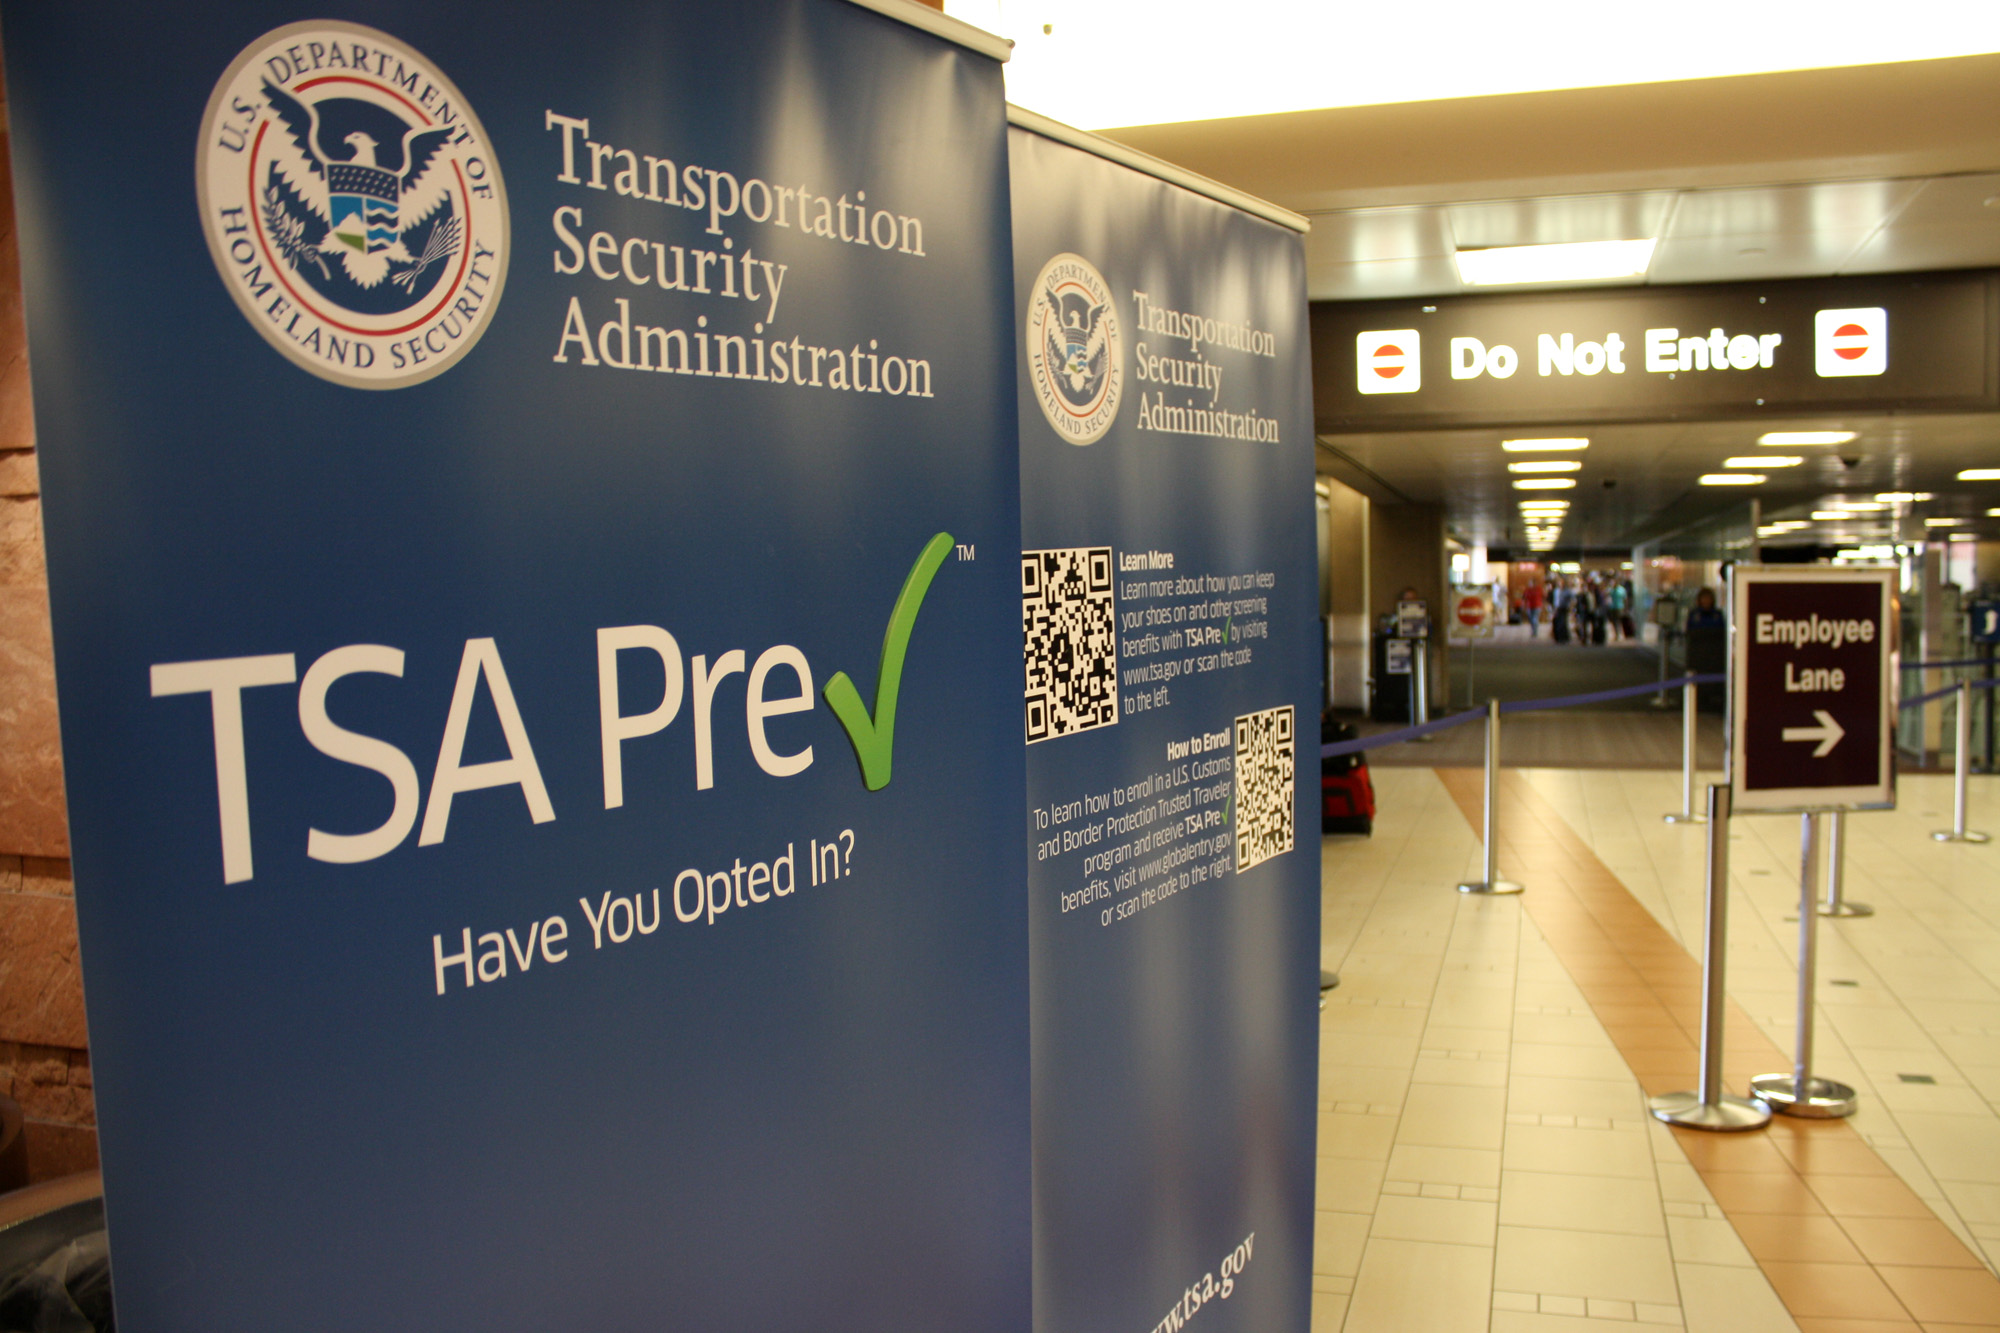 You Can Now Redeem Points for TSA Precheck on Southwest Airlines